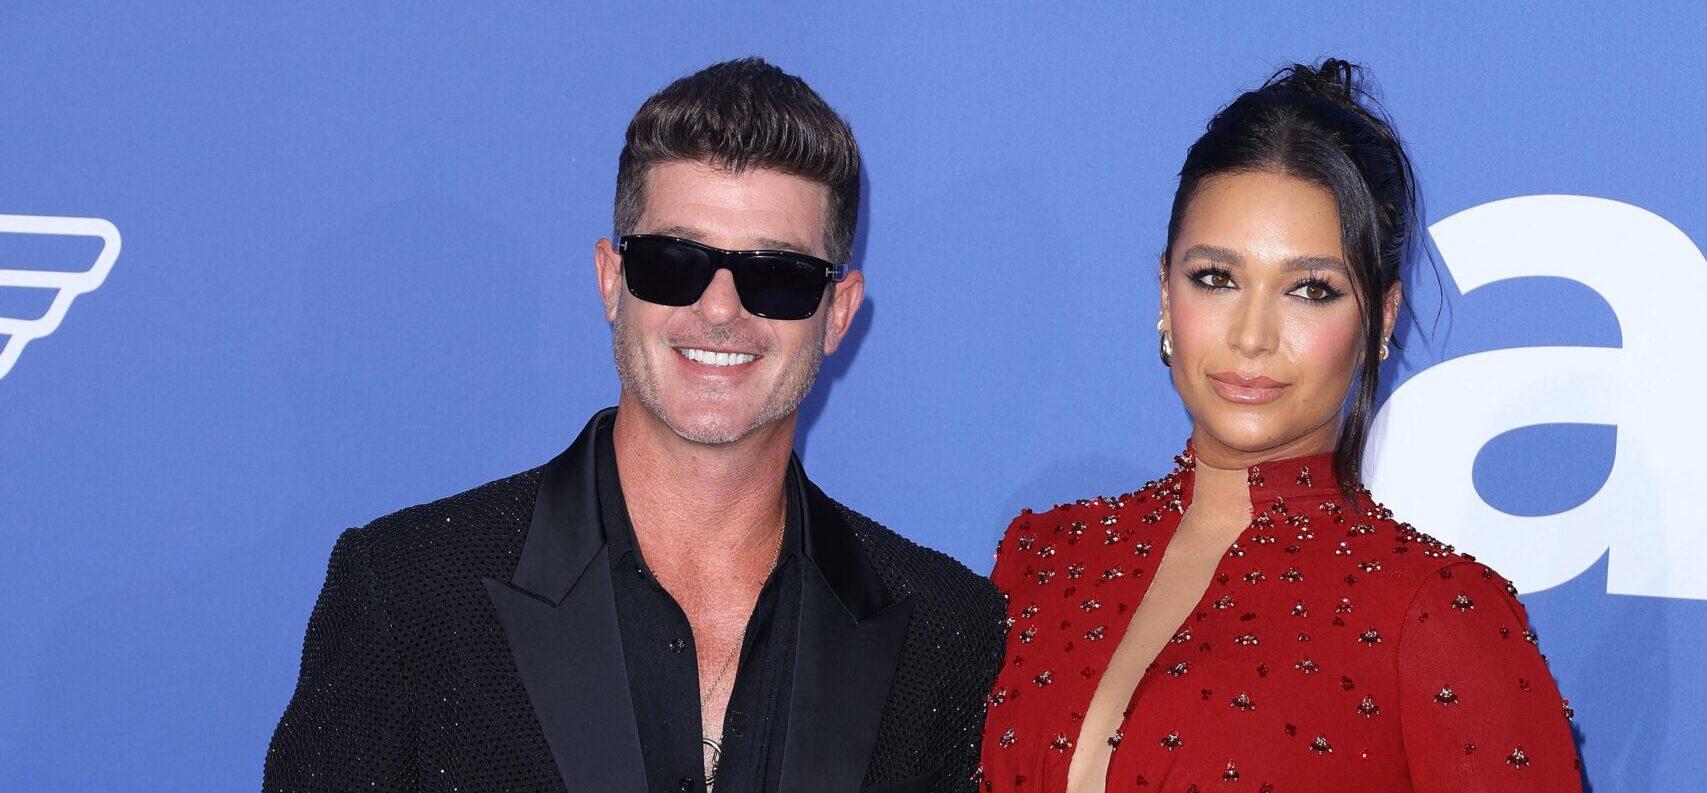 Robin Thicke’s Fiancée April Love Geary Stuns In ‘Barbie’ Pink Lingerie